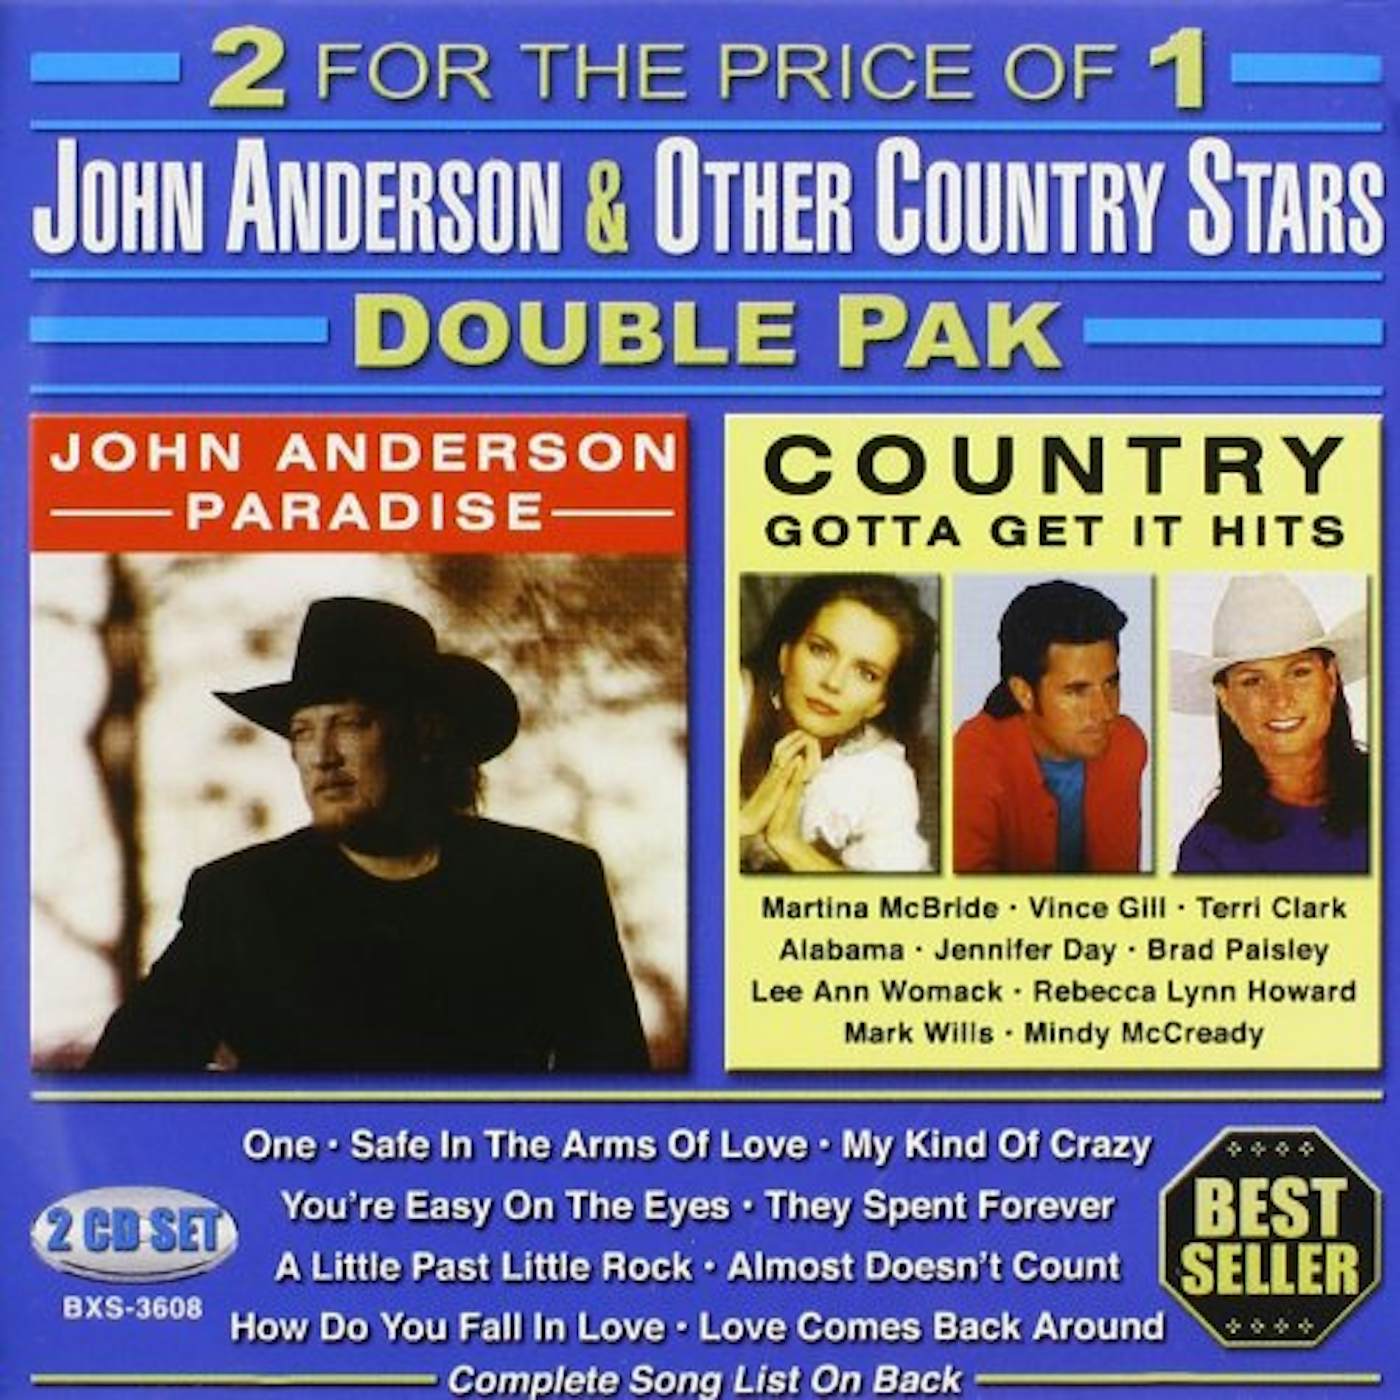 JOHN ANDERSON & OTHER COUNTRY STARS CD